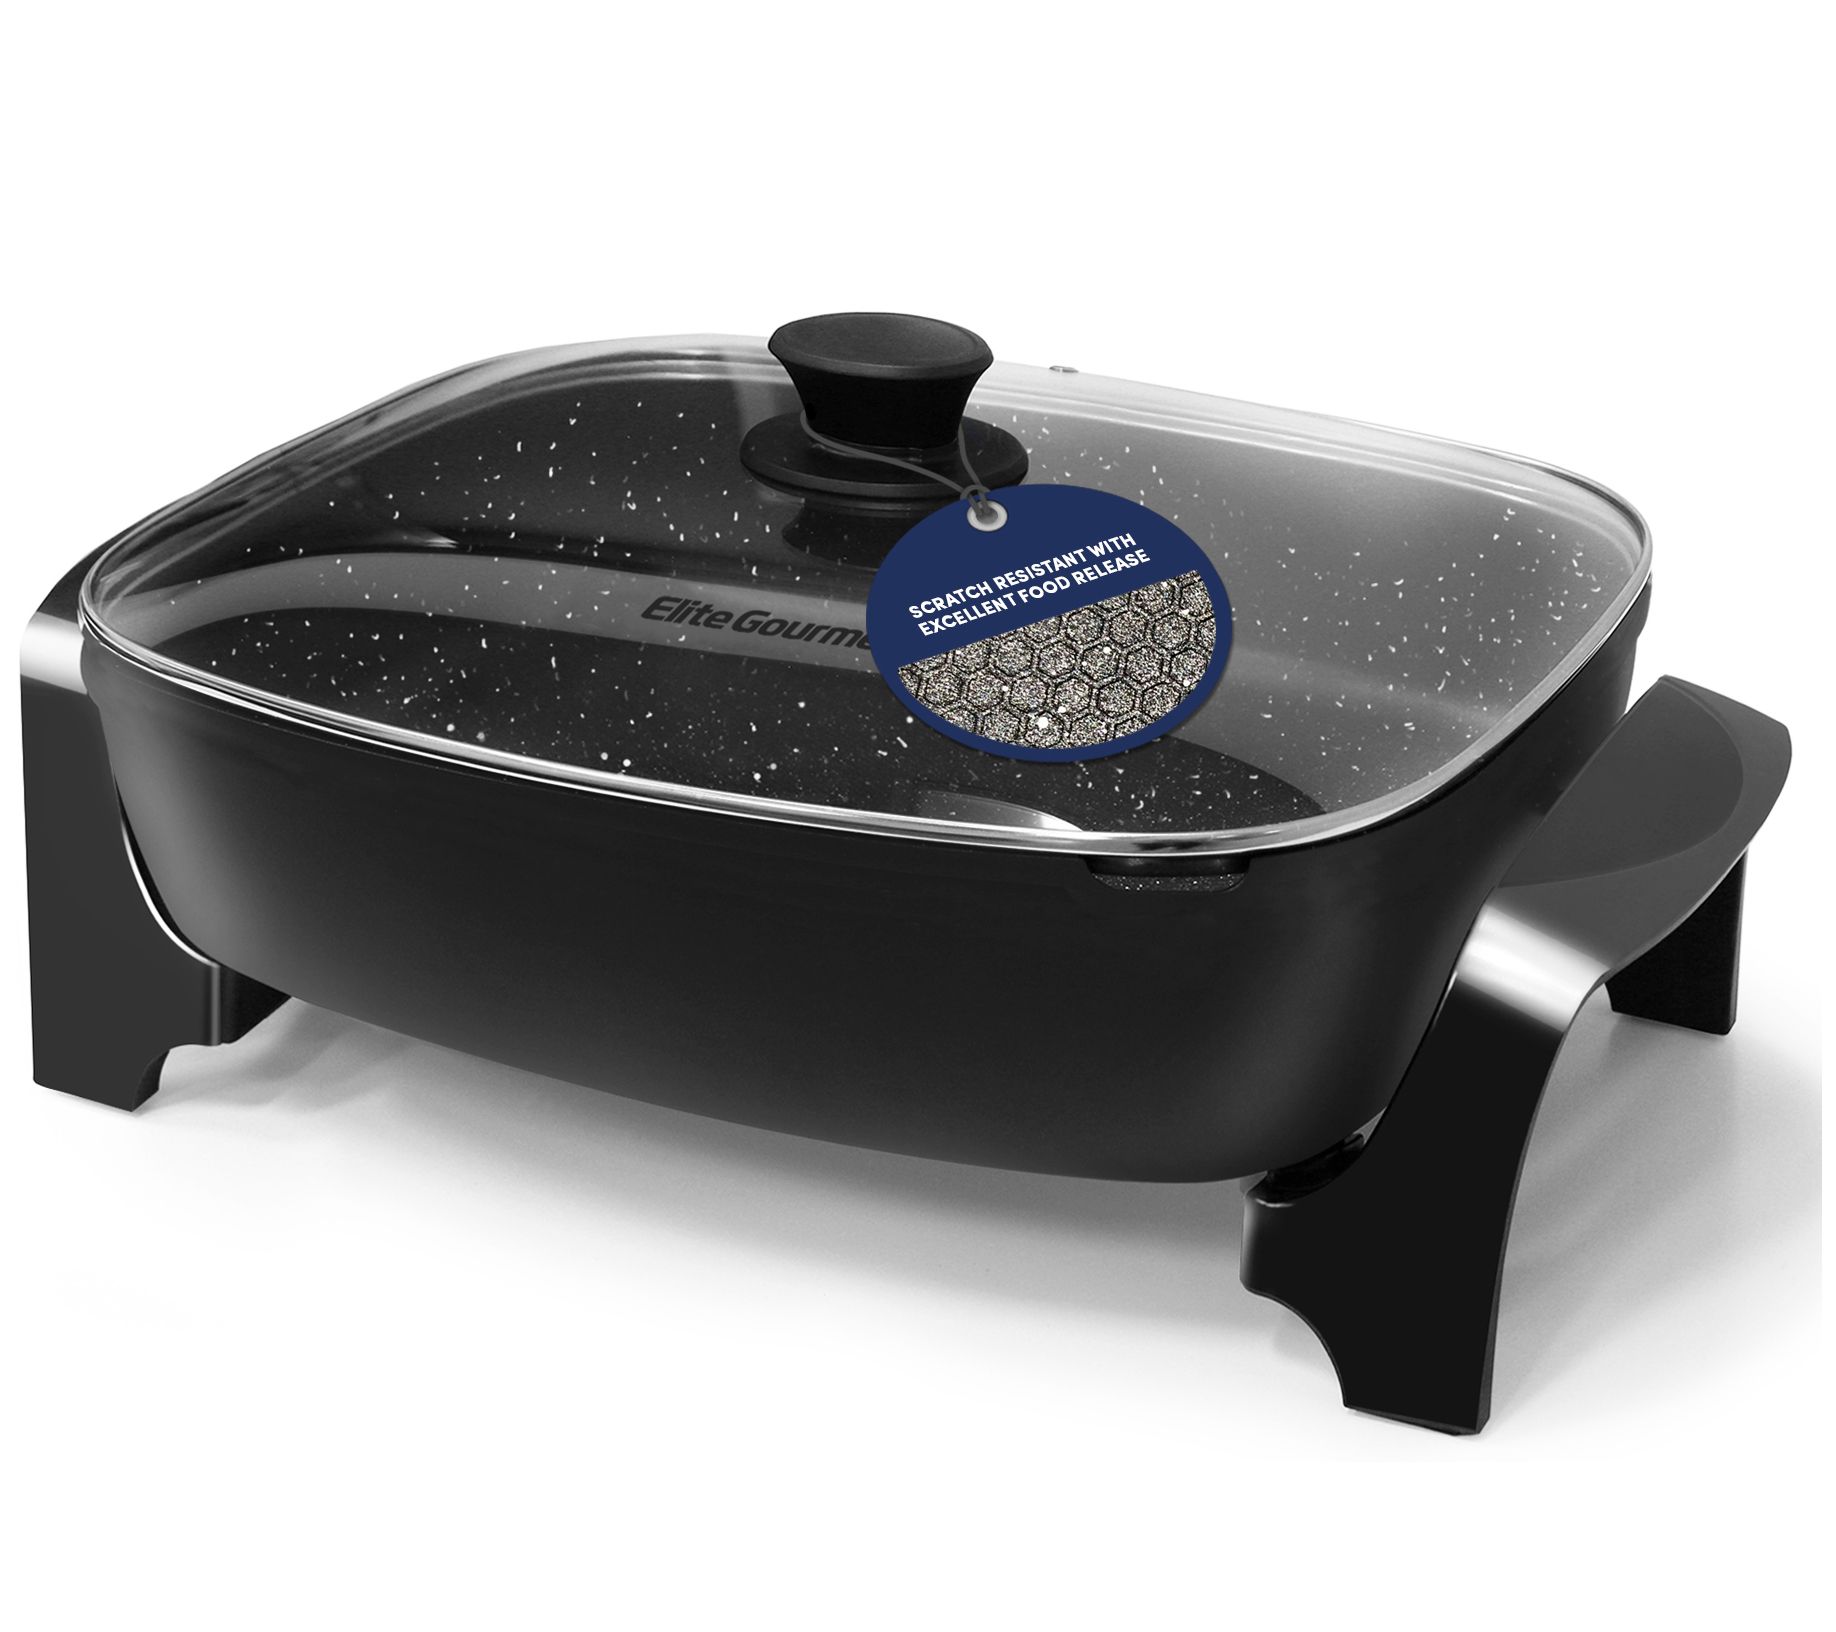  Electric Skillet Nonstick Foldaway - 16 inch, with